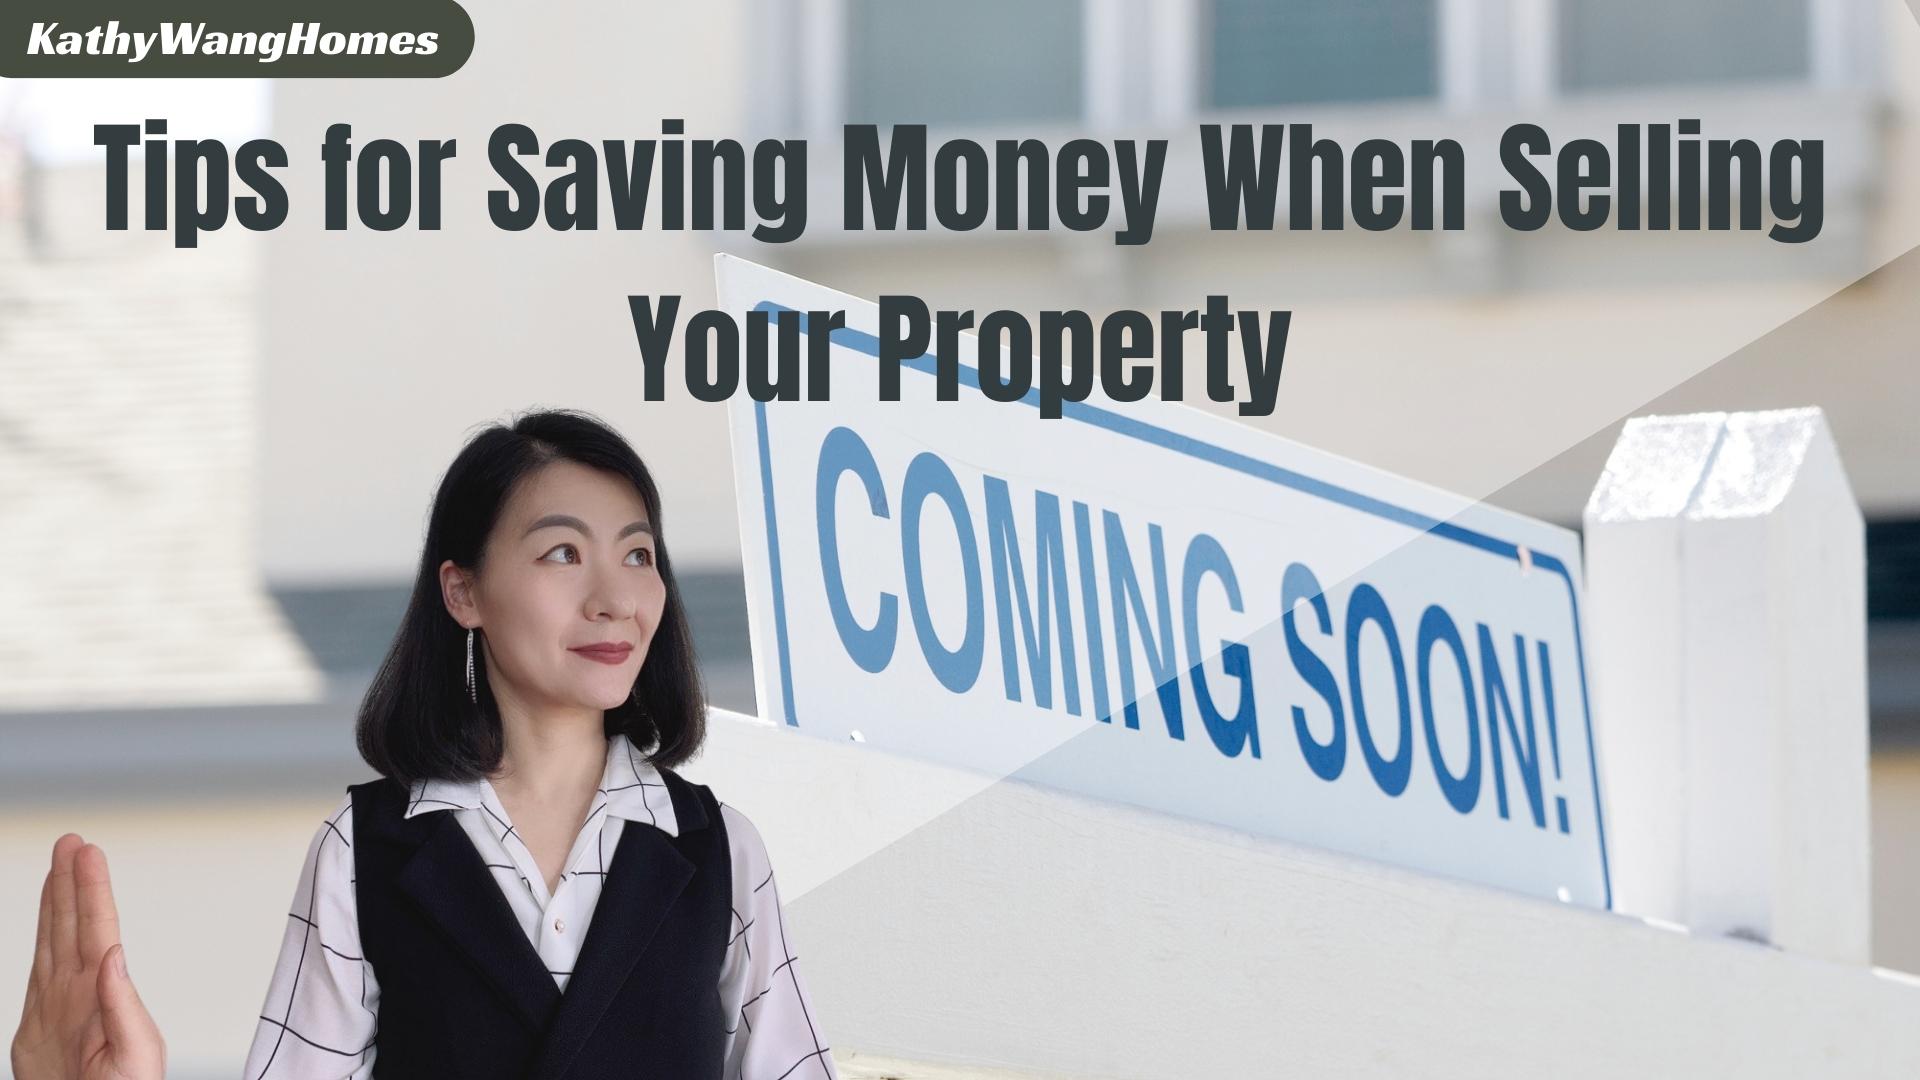 Tips for saving money before selling your house